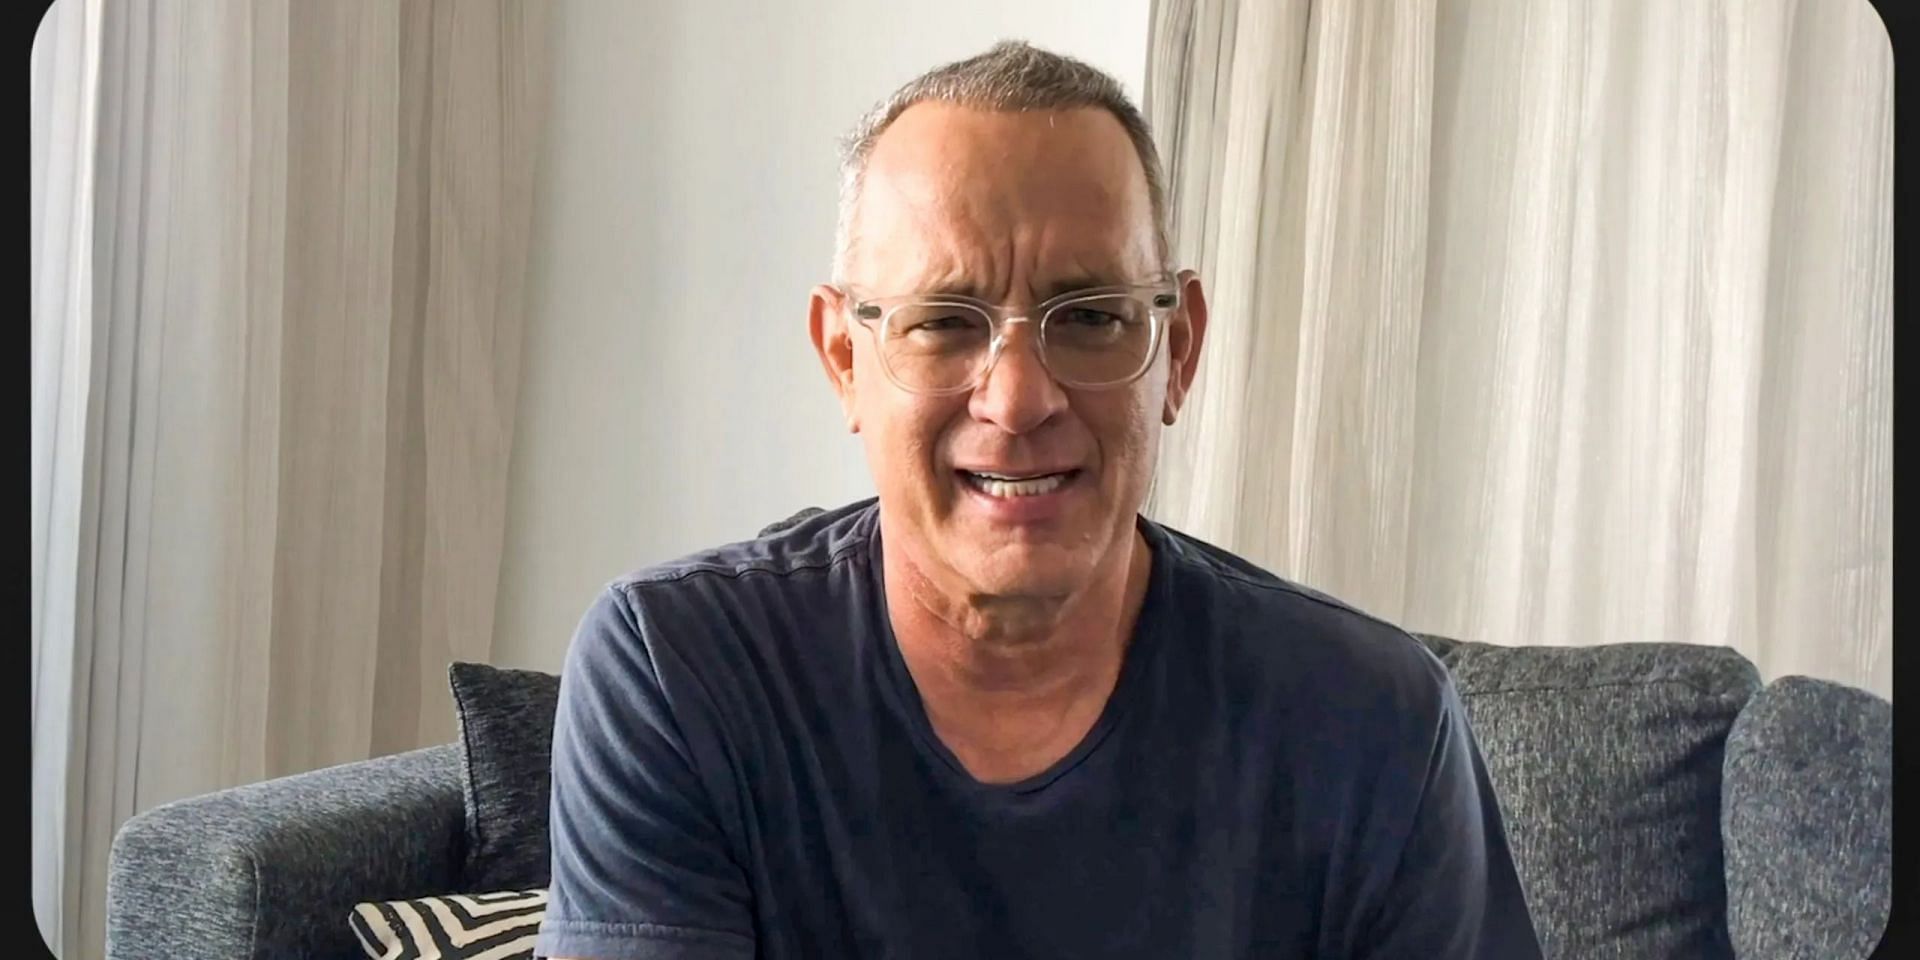 Fans fear for Tom Hanks' health as video of actor's hands shaking goes